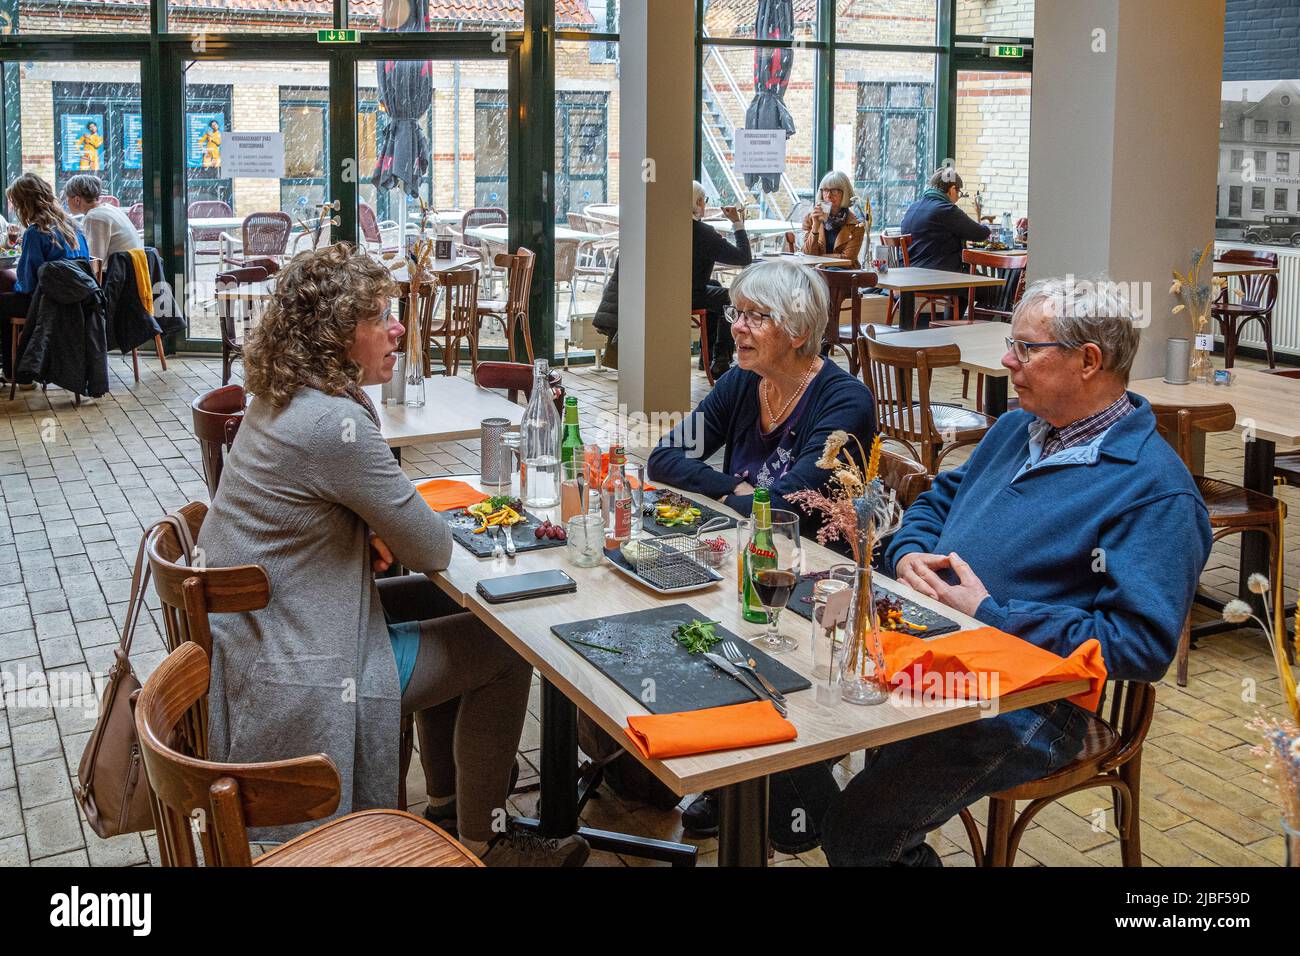 Elderly Danish couple sitting at a restaurant table with a girl chatting while waiting for the dishes. Assens, Denmark, Europe Stock Photo